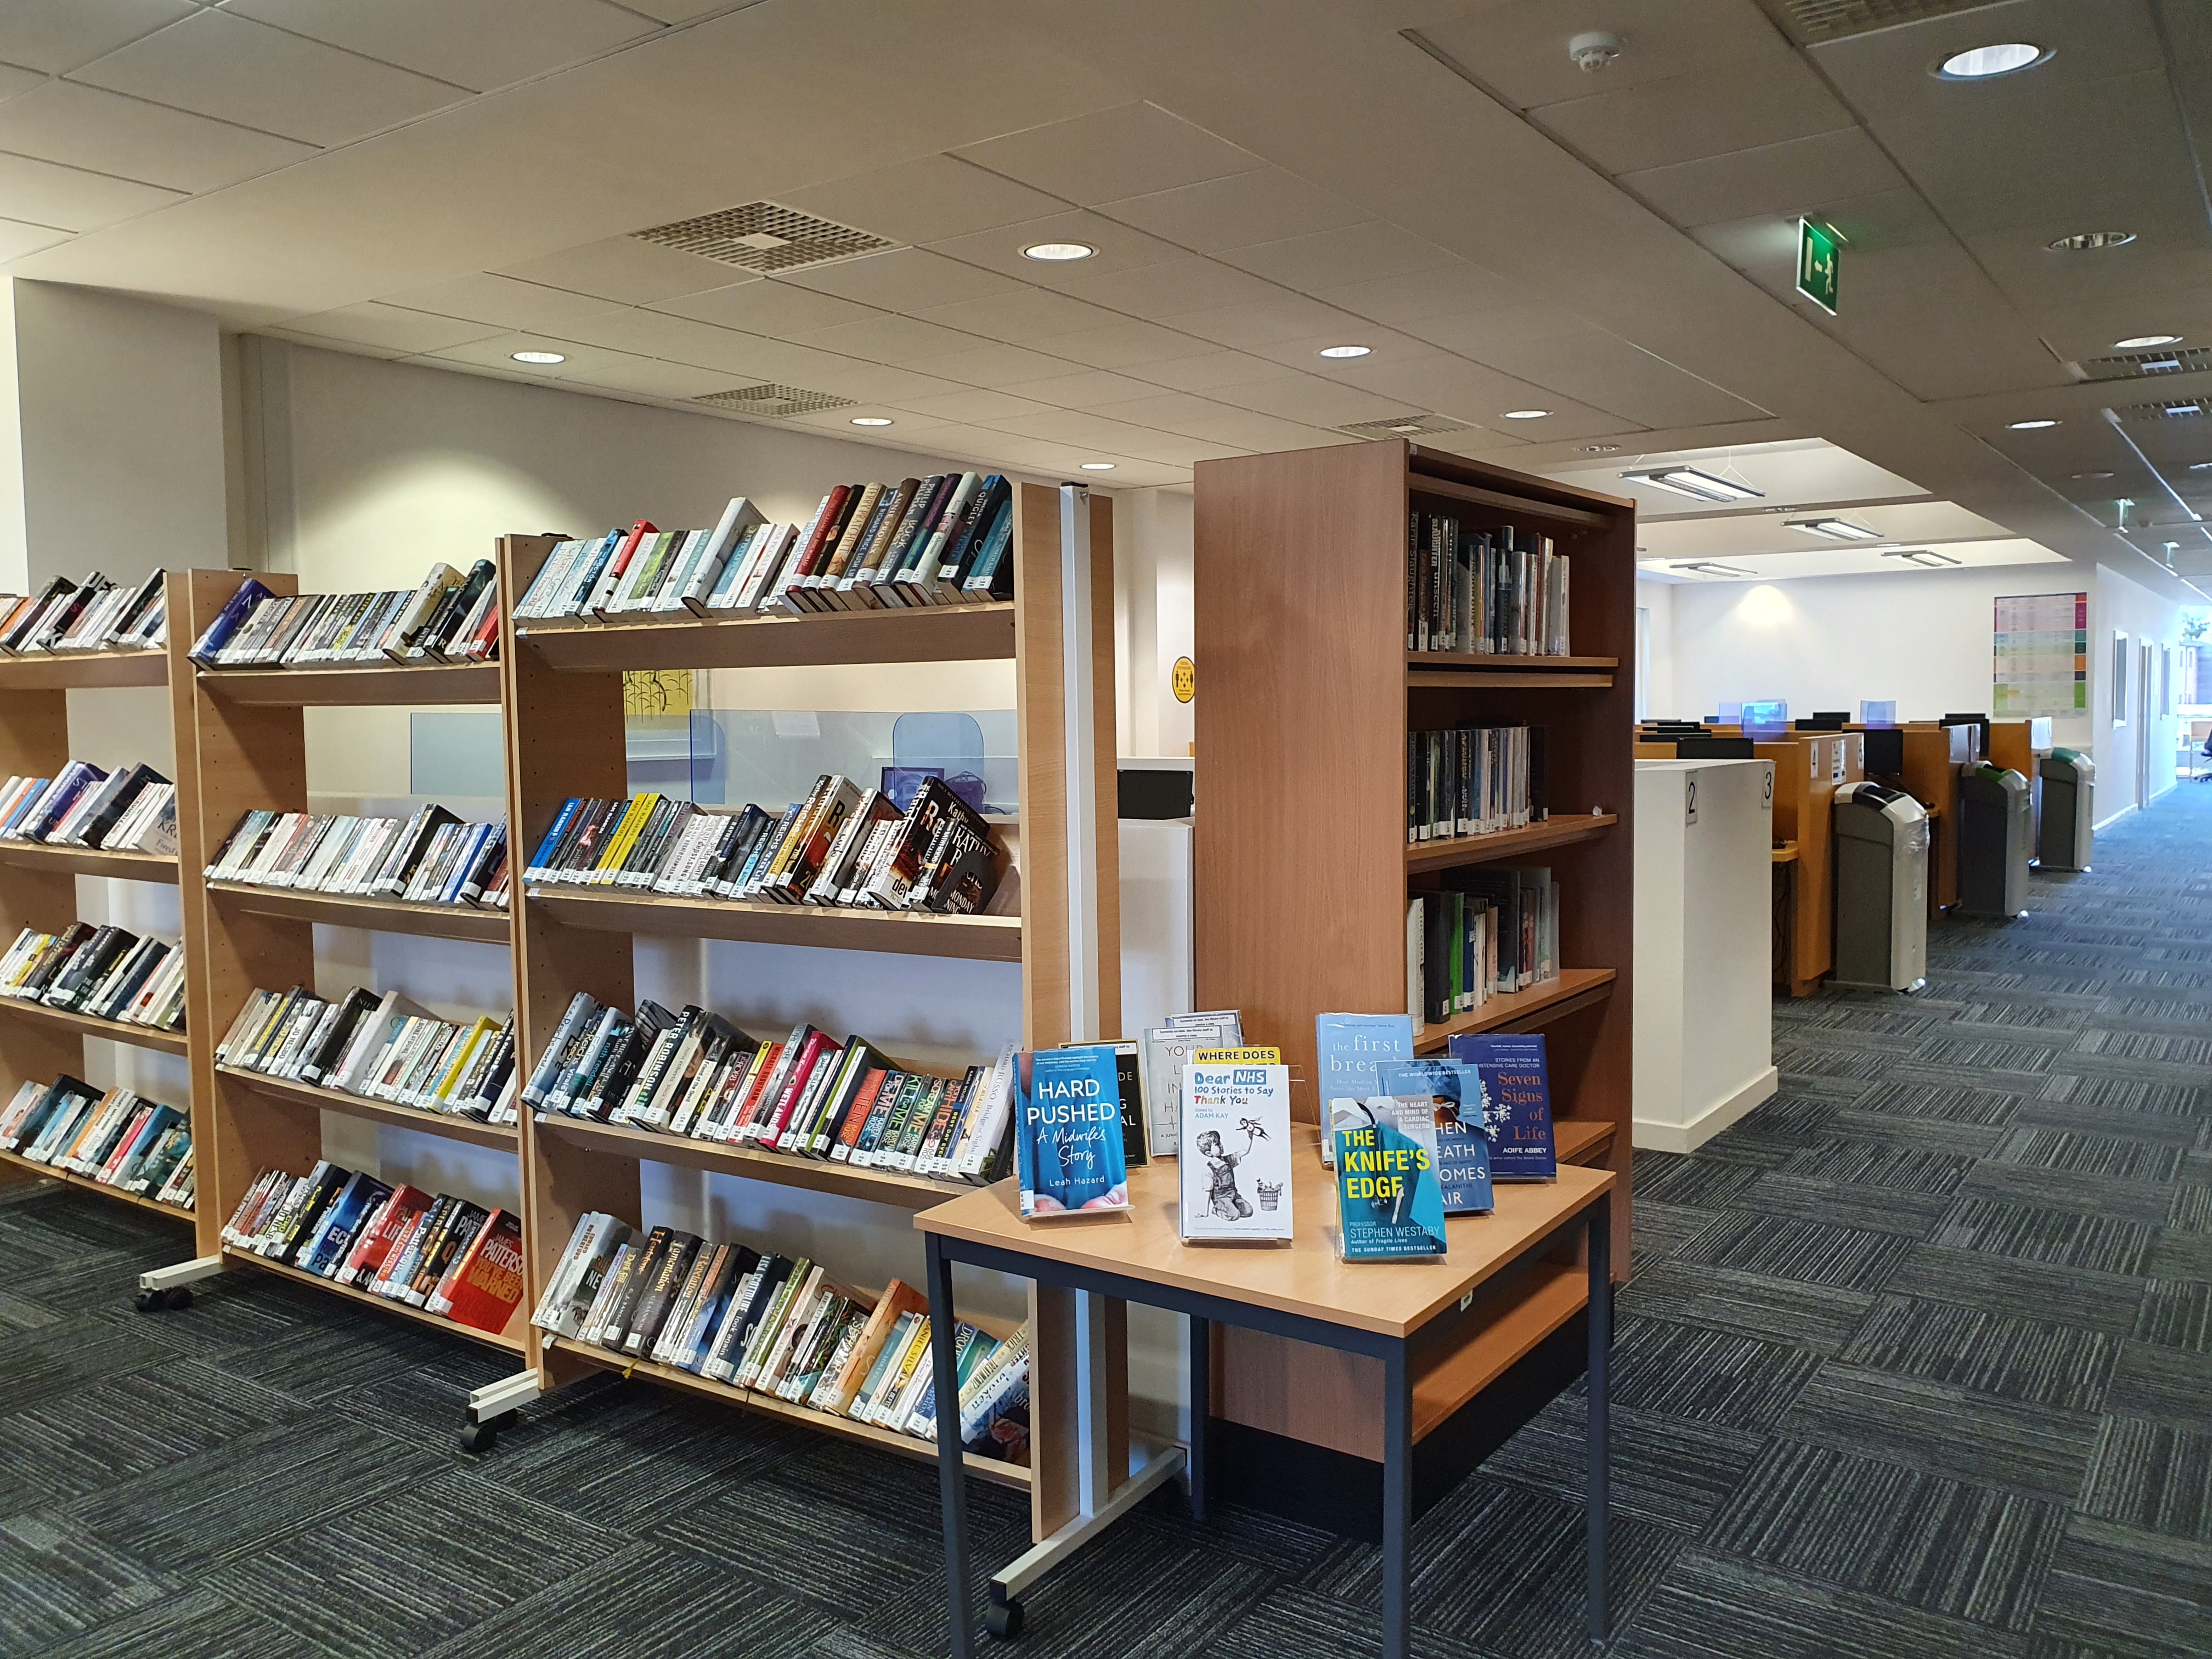 Changes to UHCW Library as a designated rest area